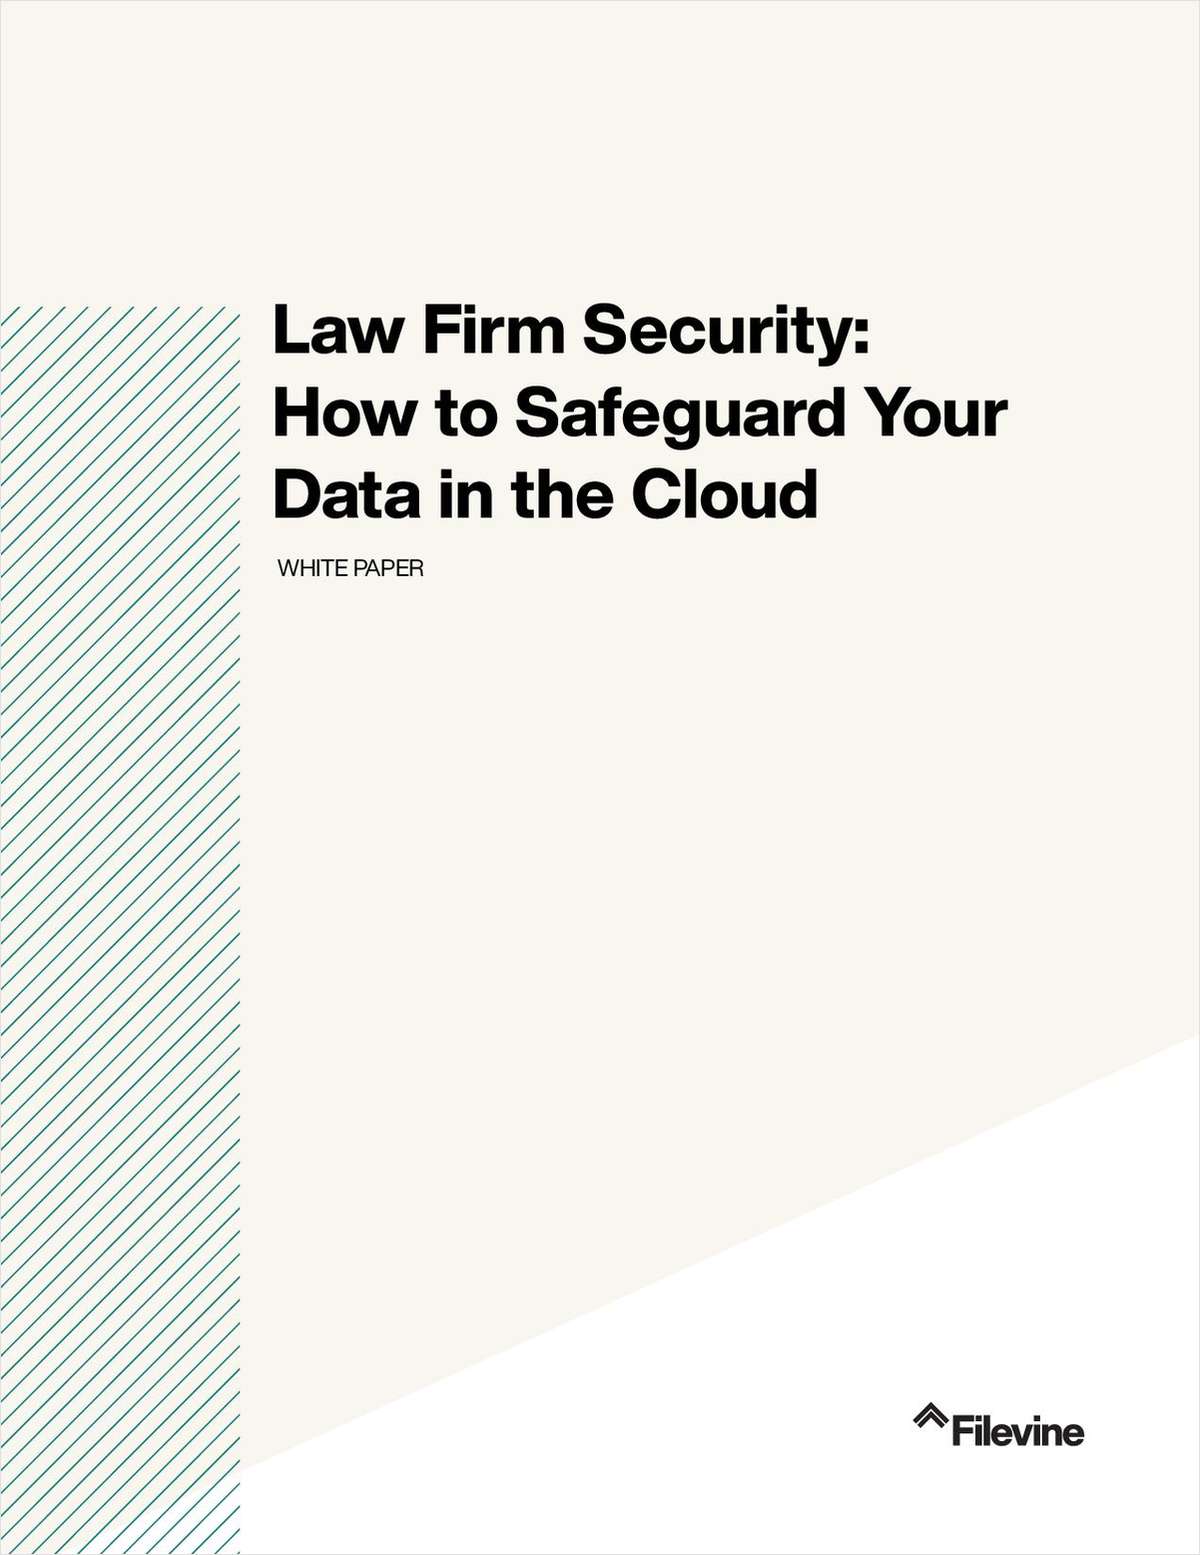 As cyberthreats proliferate, data security has become a serious concern for law firms. The need to understand and secure your firm’s IT operations is clear, but the path toward doing so can be less obvious. This white paper explores the top 3 cybersecurity risks today and techniques you can use to mitigate them by leveraging the cloud.